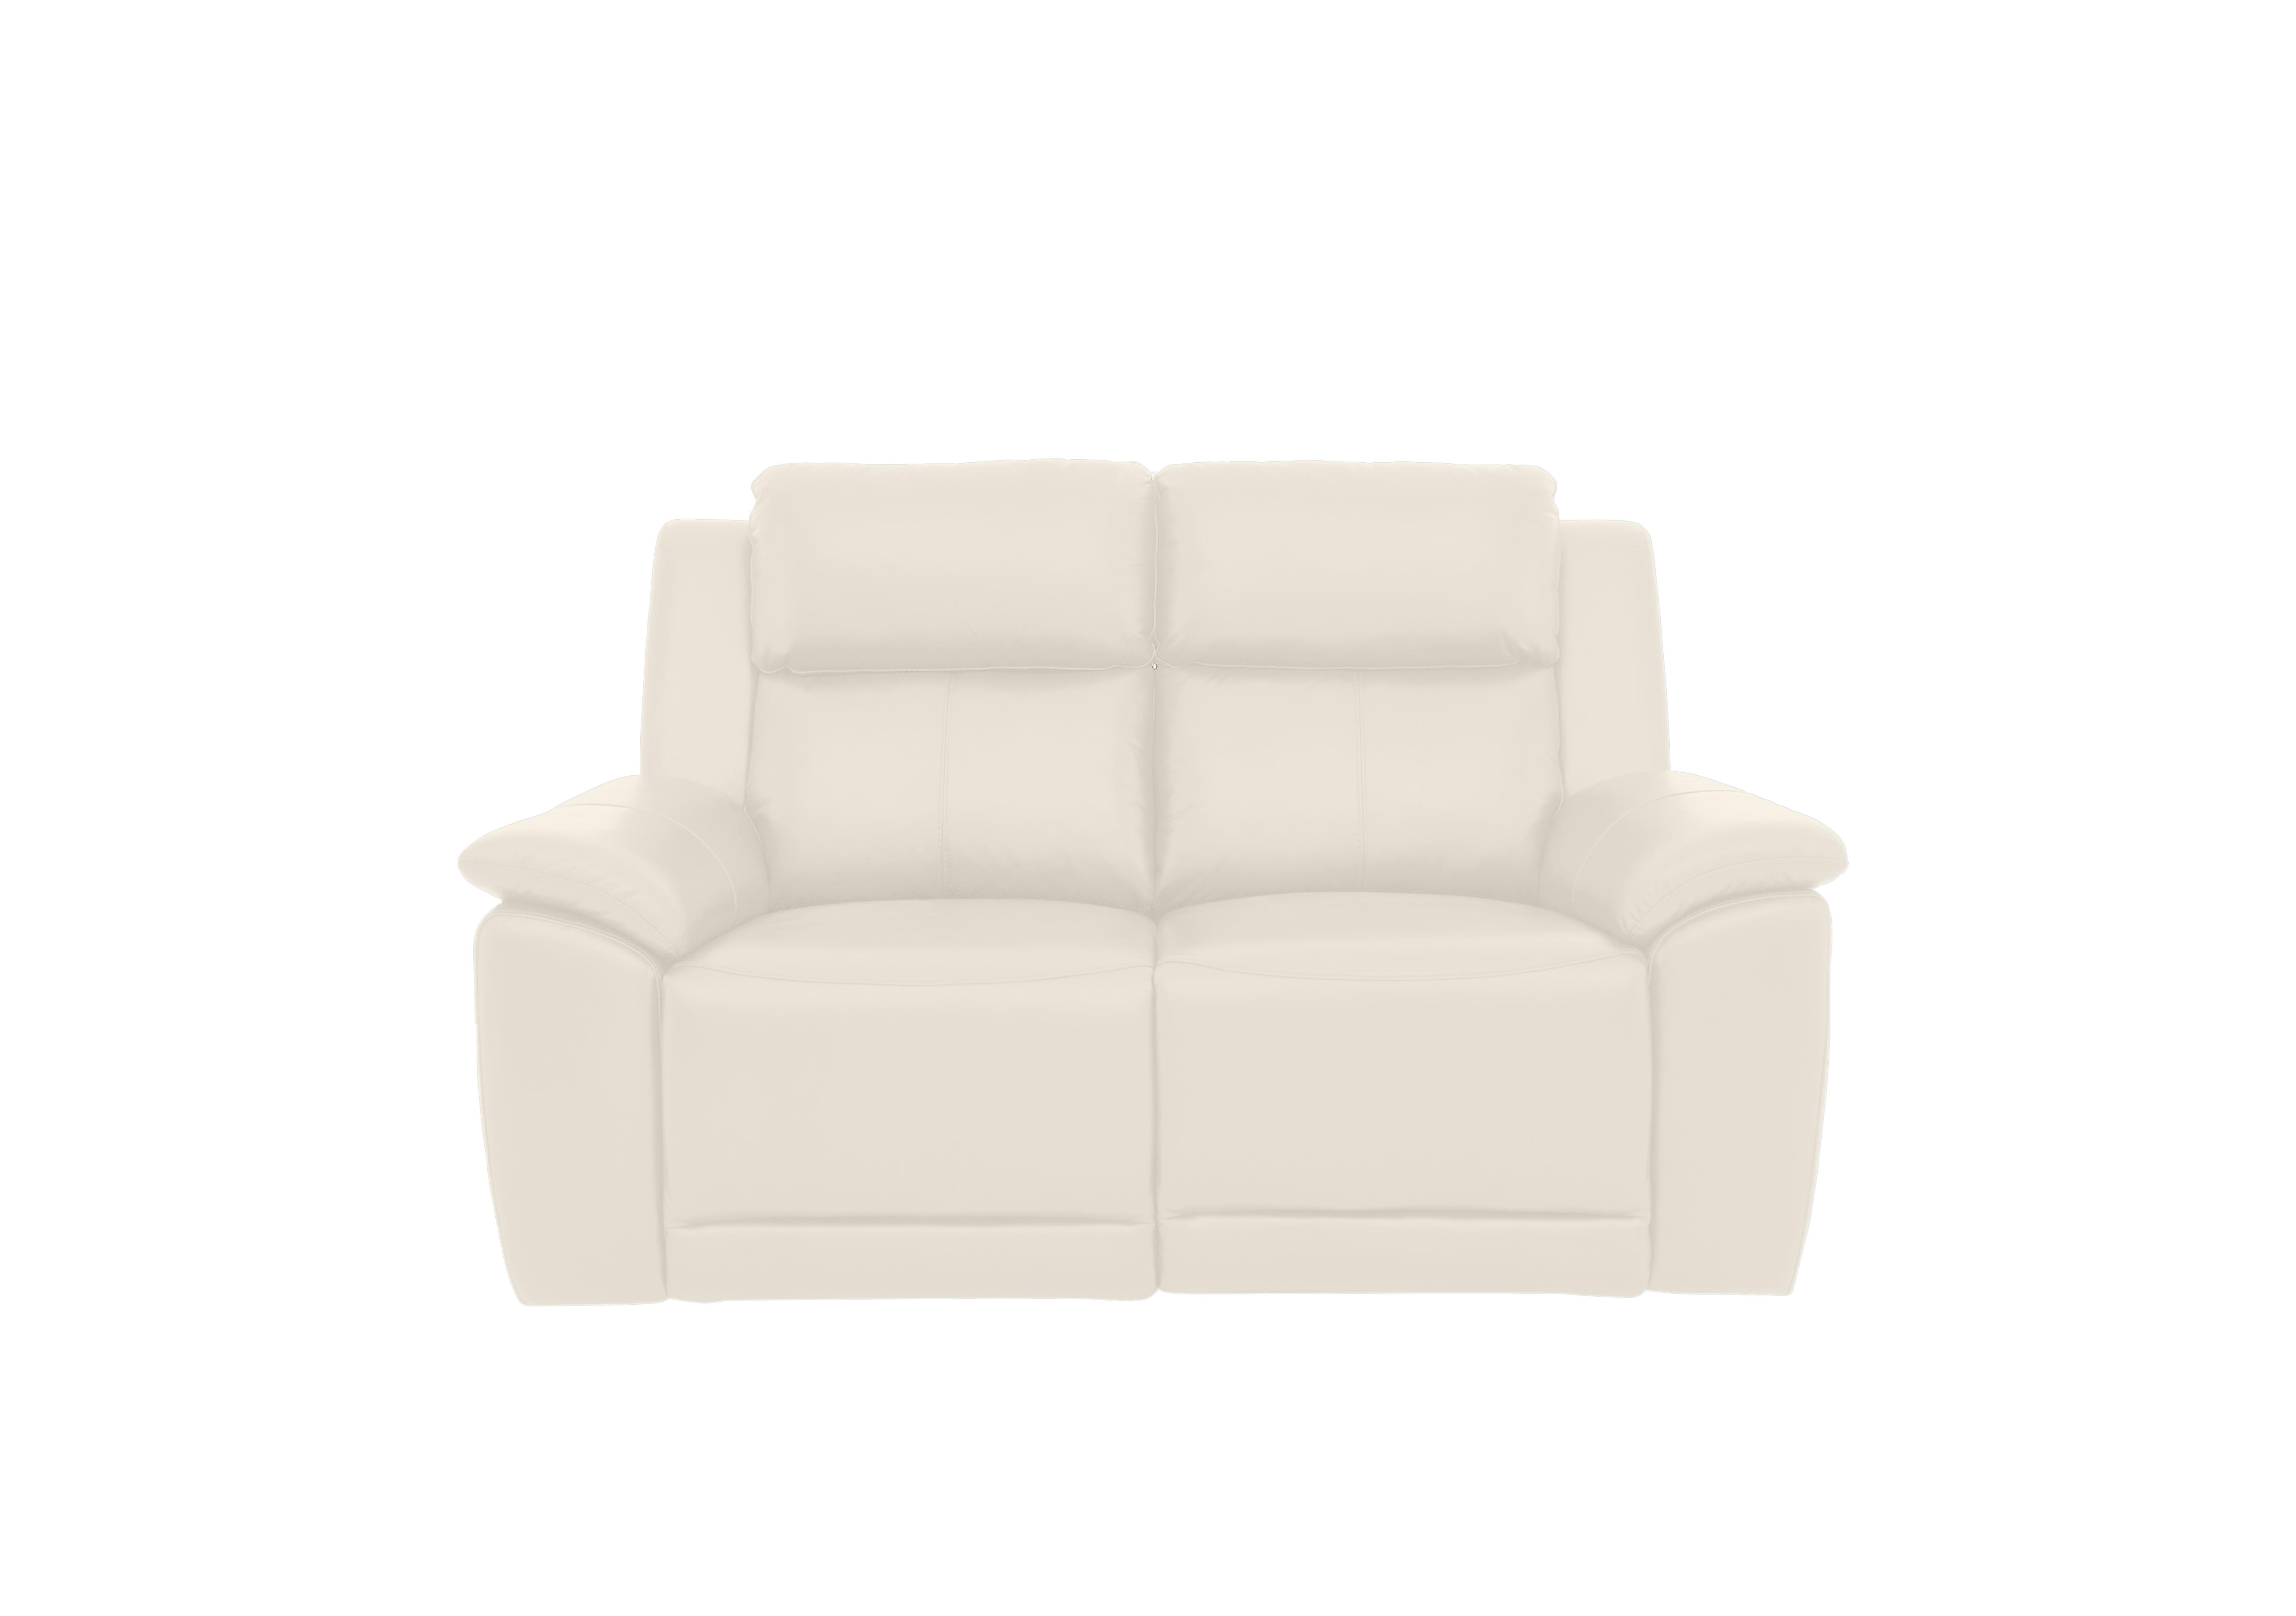 Utah 2 Seater Leather Power Recliner Sofa with Power Headrests and Power Lumbar in White Le-9307 on Furniture Village